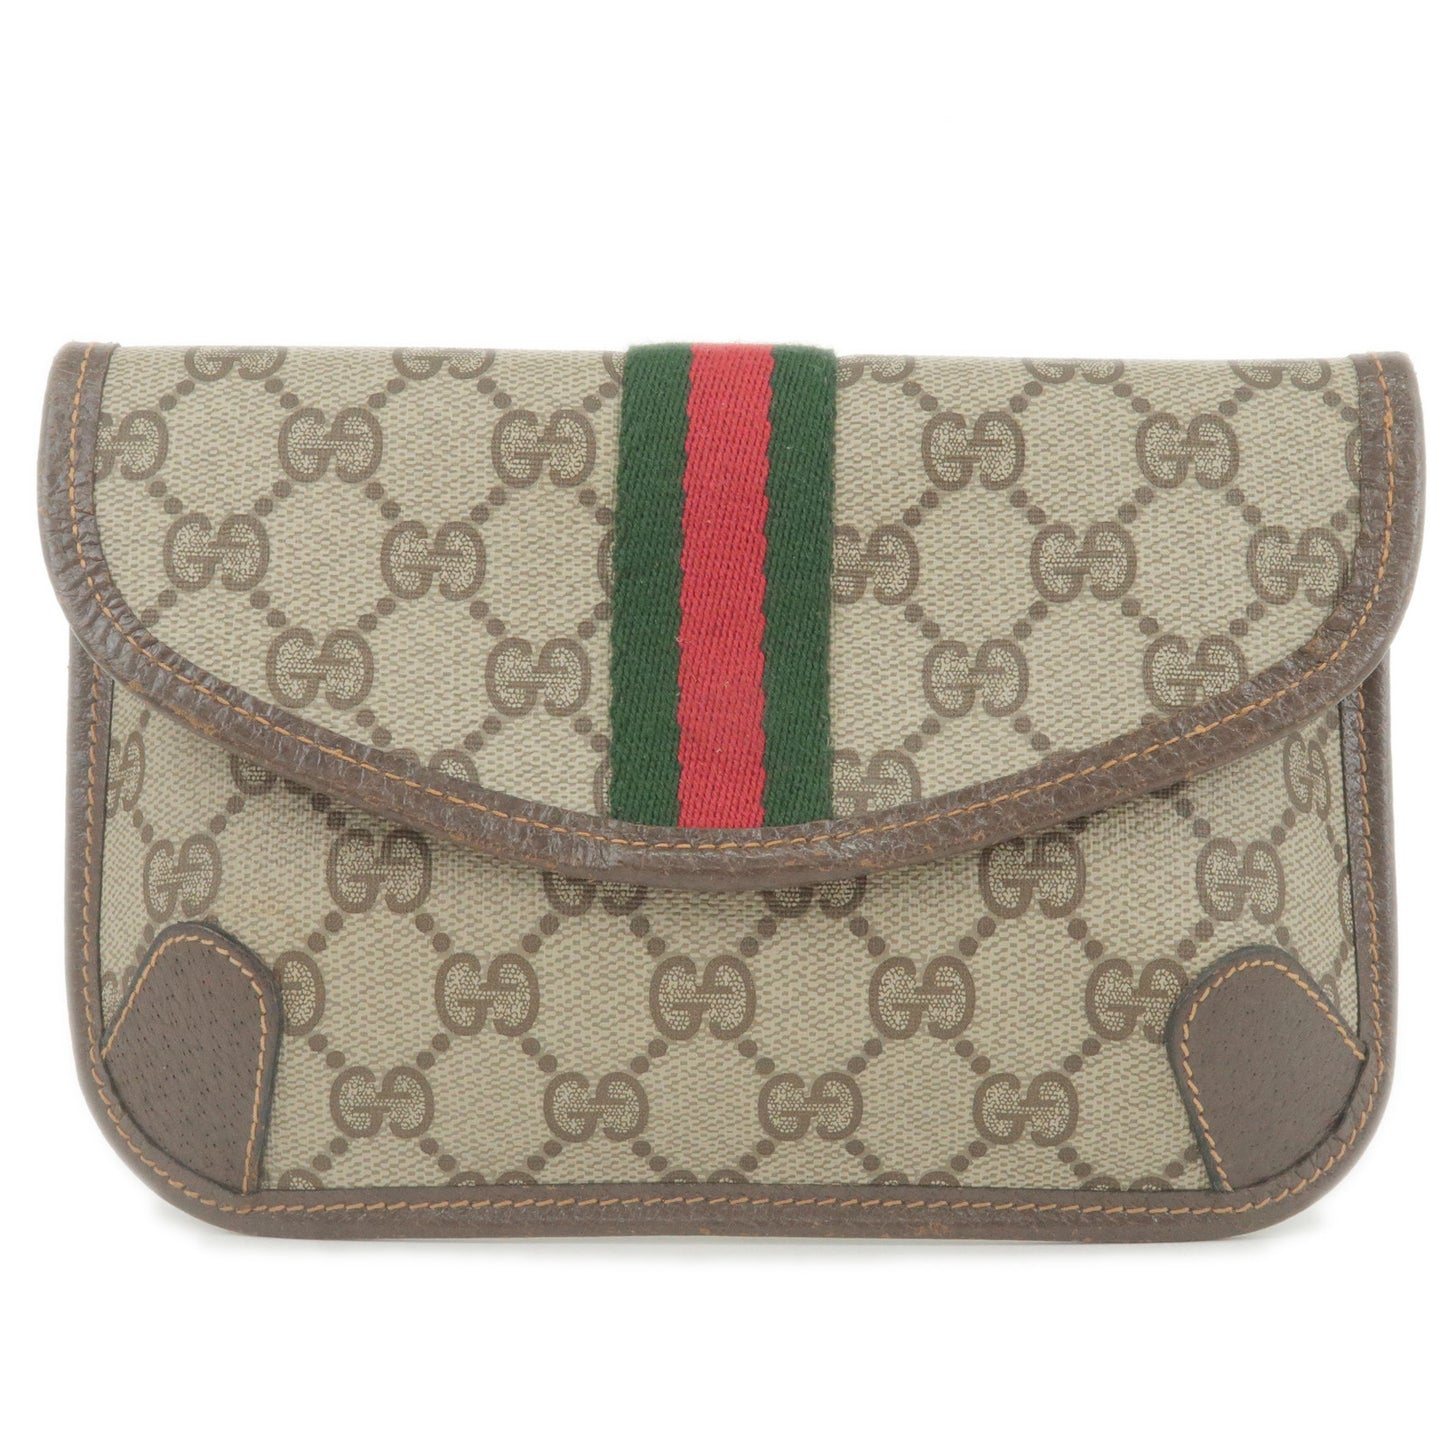 GUCCI-Sherry-GG-Plus-Leather-Clutch-Bag-Pouch-Beige-89.01.021